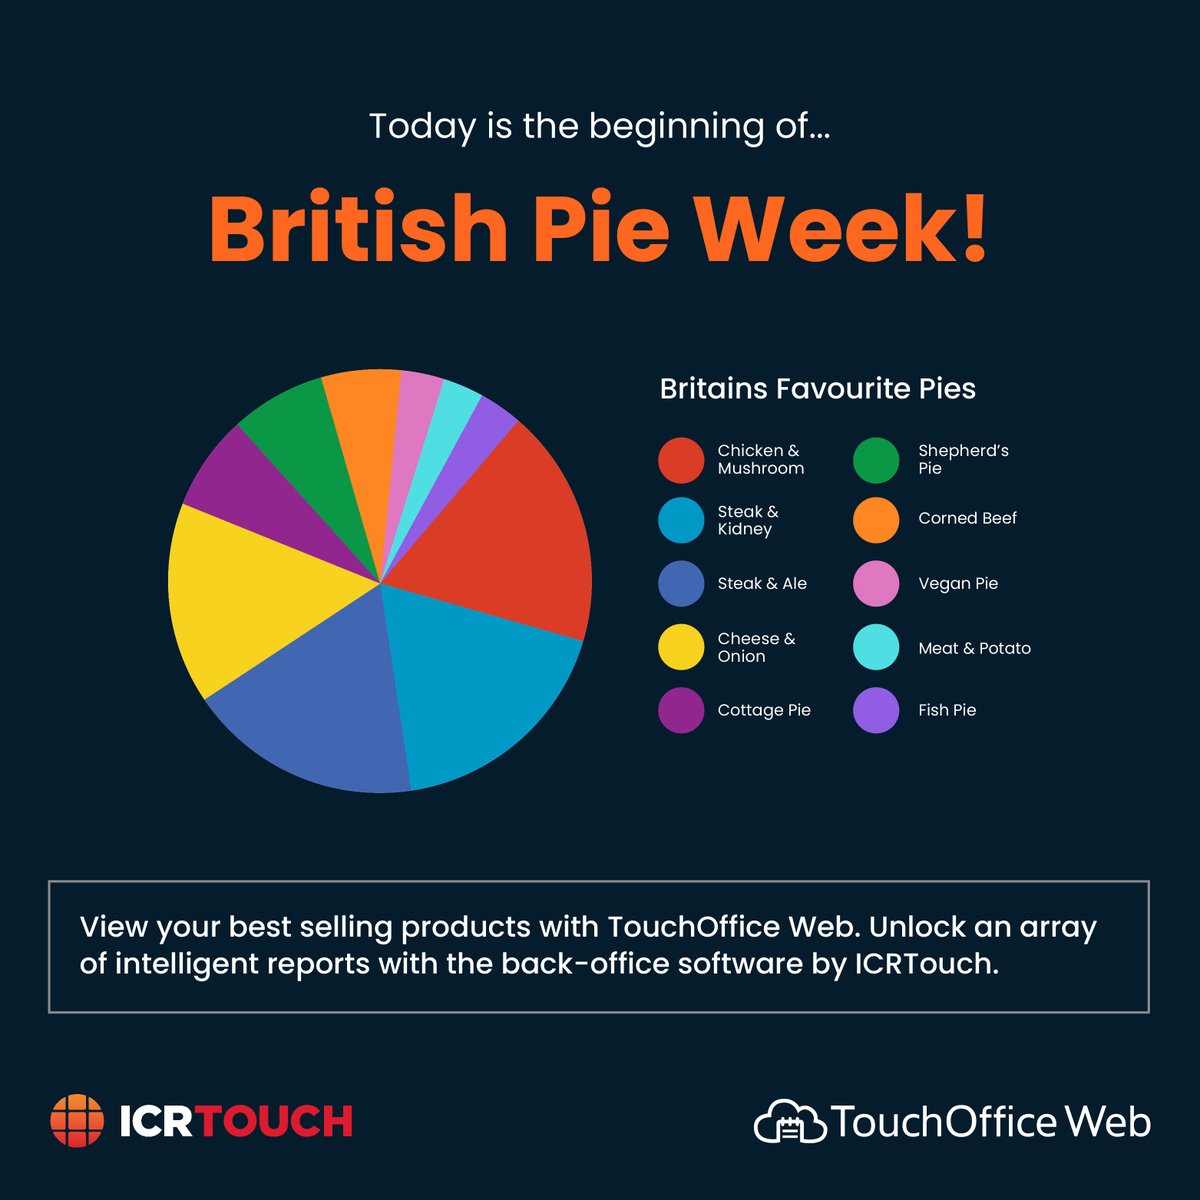 Happy British Pie Week! 🥧

Popular choices might be sweet or savoury, but we can’t deny we love a good pie chart here at ICRTouch!

#weareICRTouch #TouchOfficeWeb #BritishPieWeek